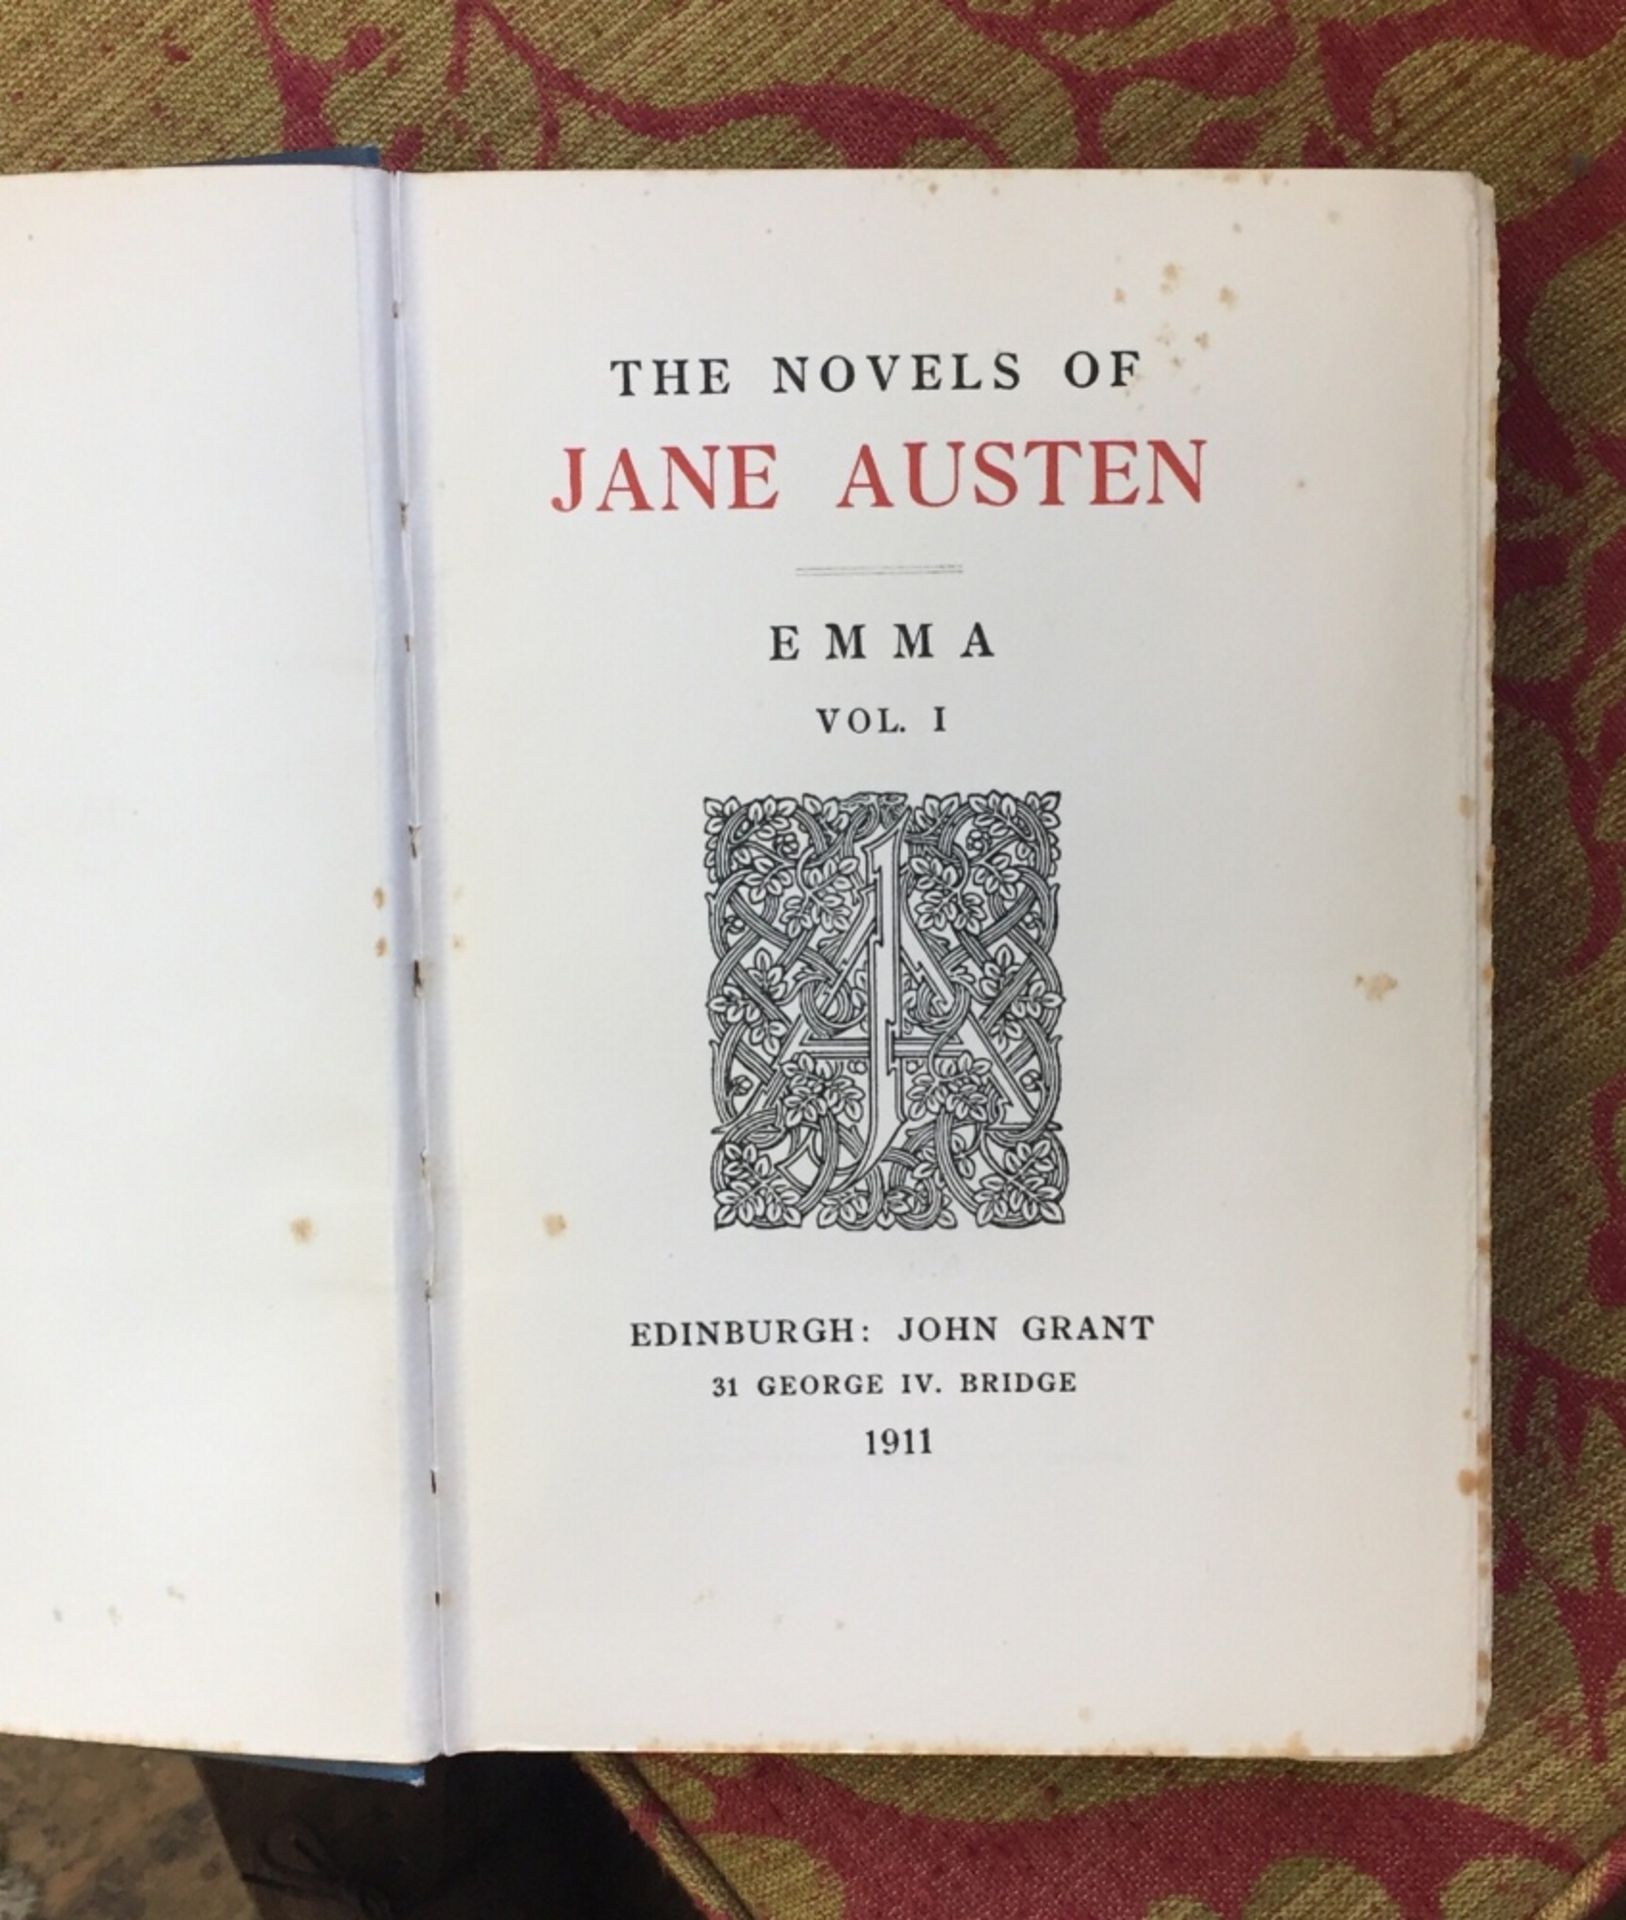 The Novels of Jane Austen, Winchester Edition, 12 volumes, 1911, gilt blue cloth, t.e.g. - Image 3 of 5